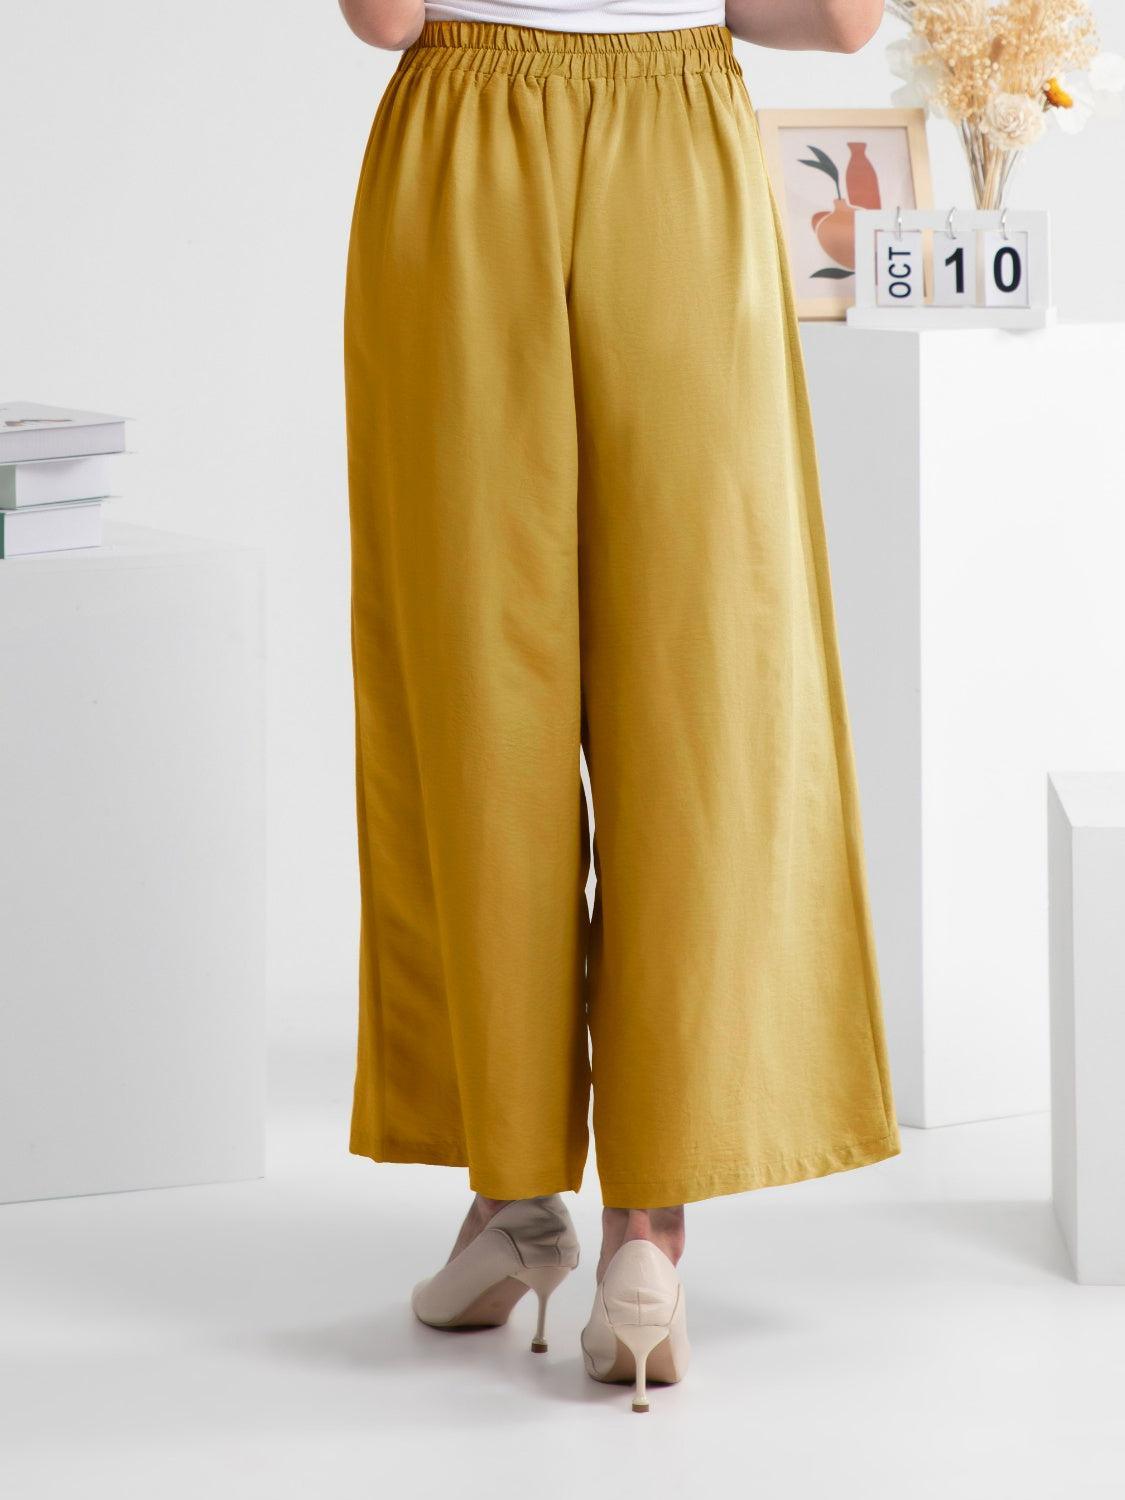 a woman in a white shirt and yellow pants